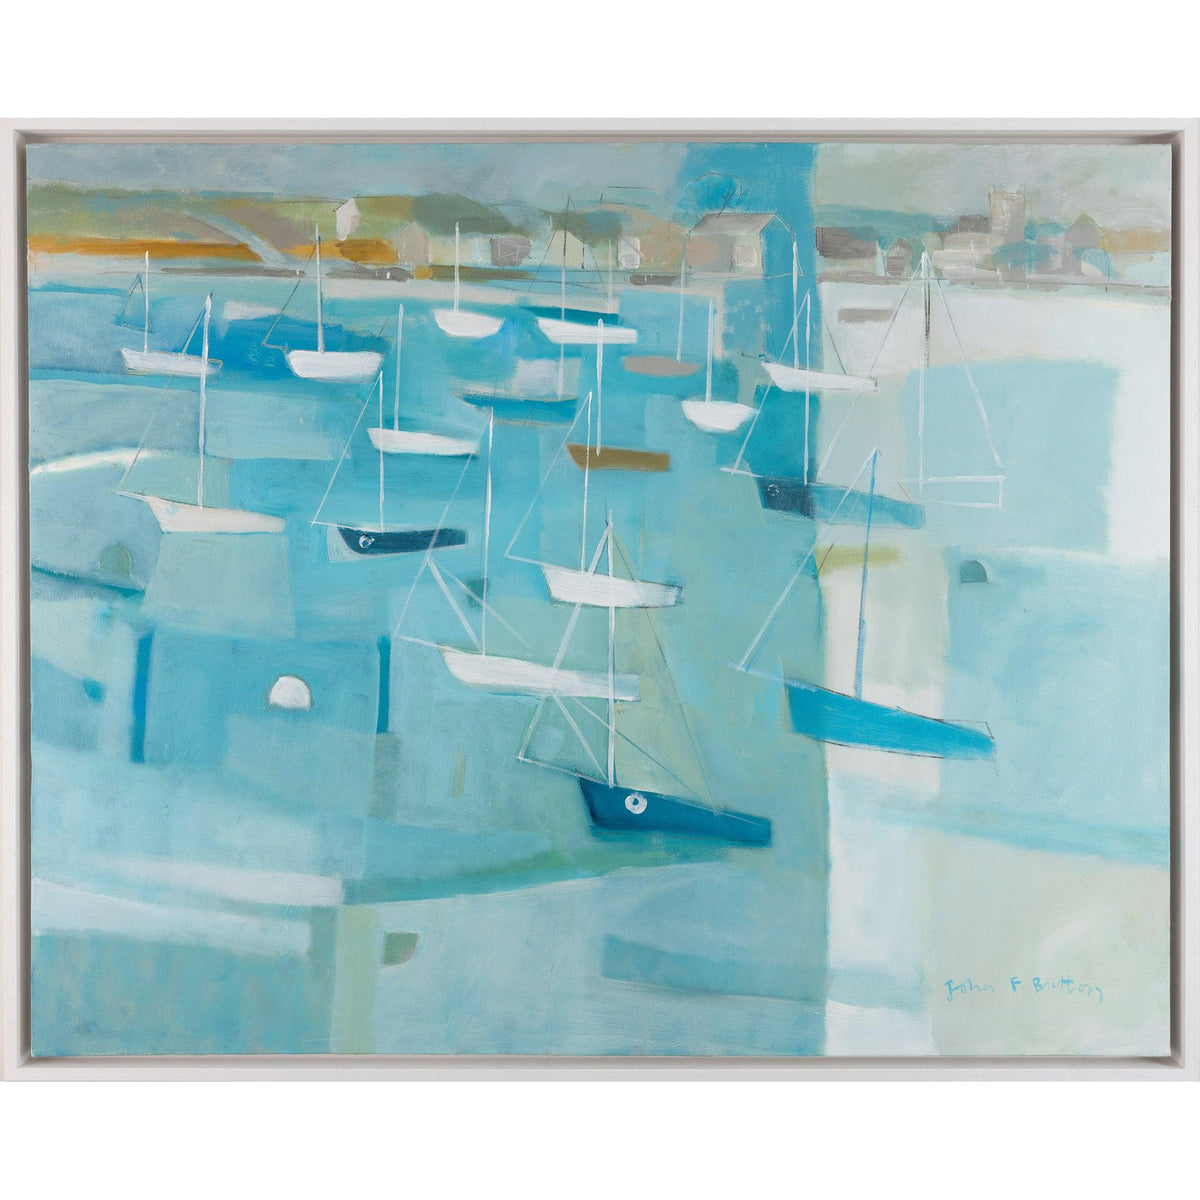 &#39;Across the Camel Estuary, Cornwall&#39; by John Button, available at Padstow Gallery, Cornwall